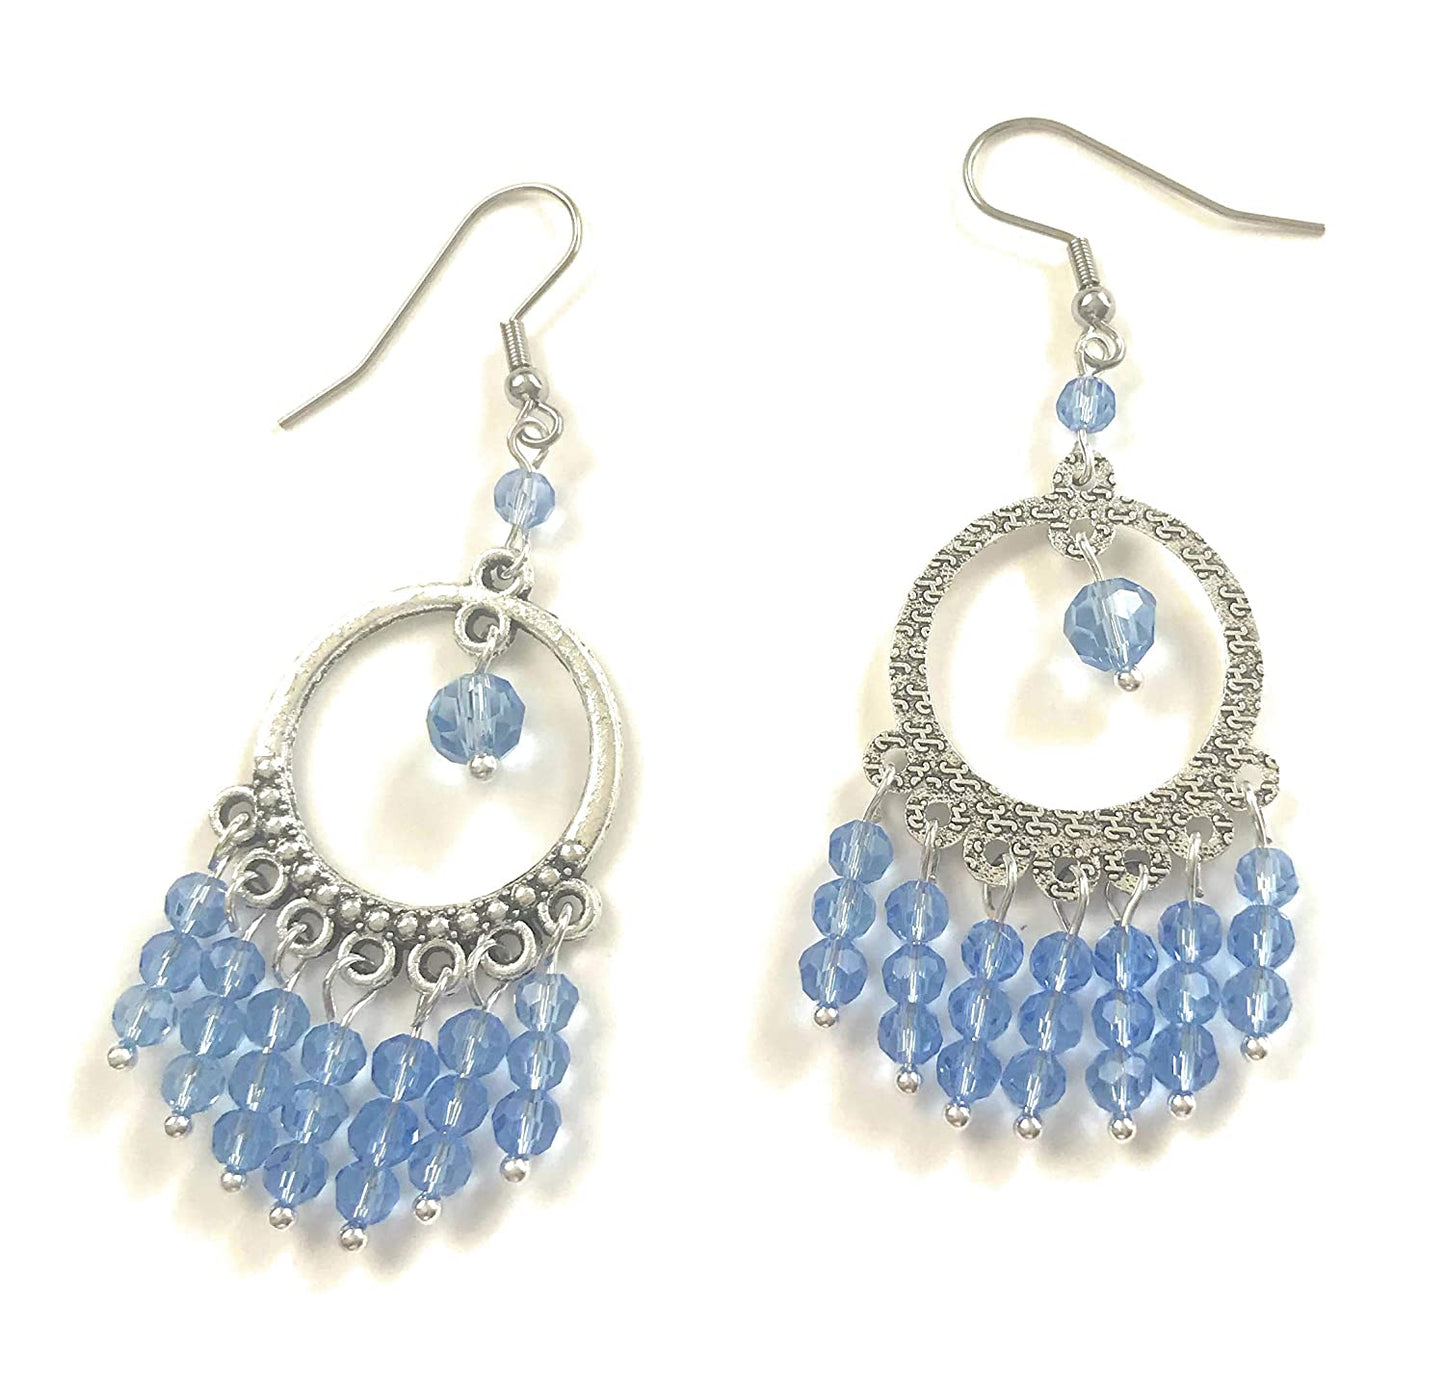 Sky Blue Beaded Chandelier Earrings Front and Back View from Scott D Jewelry Designs